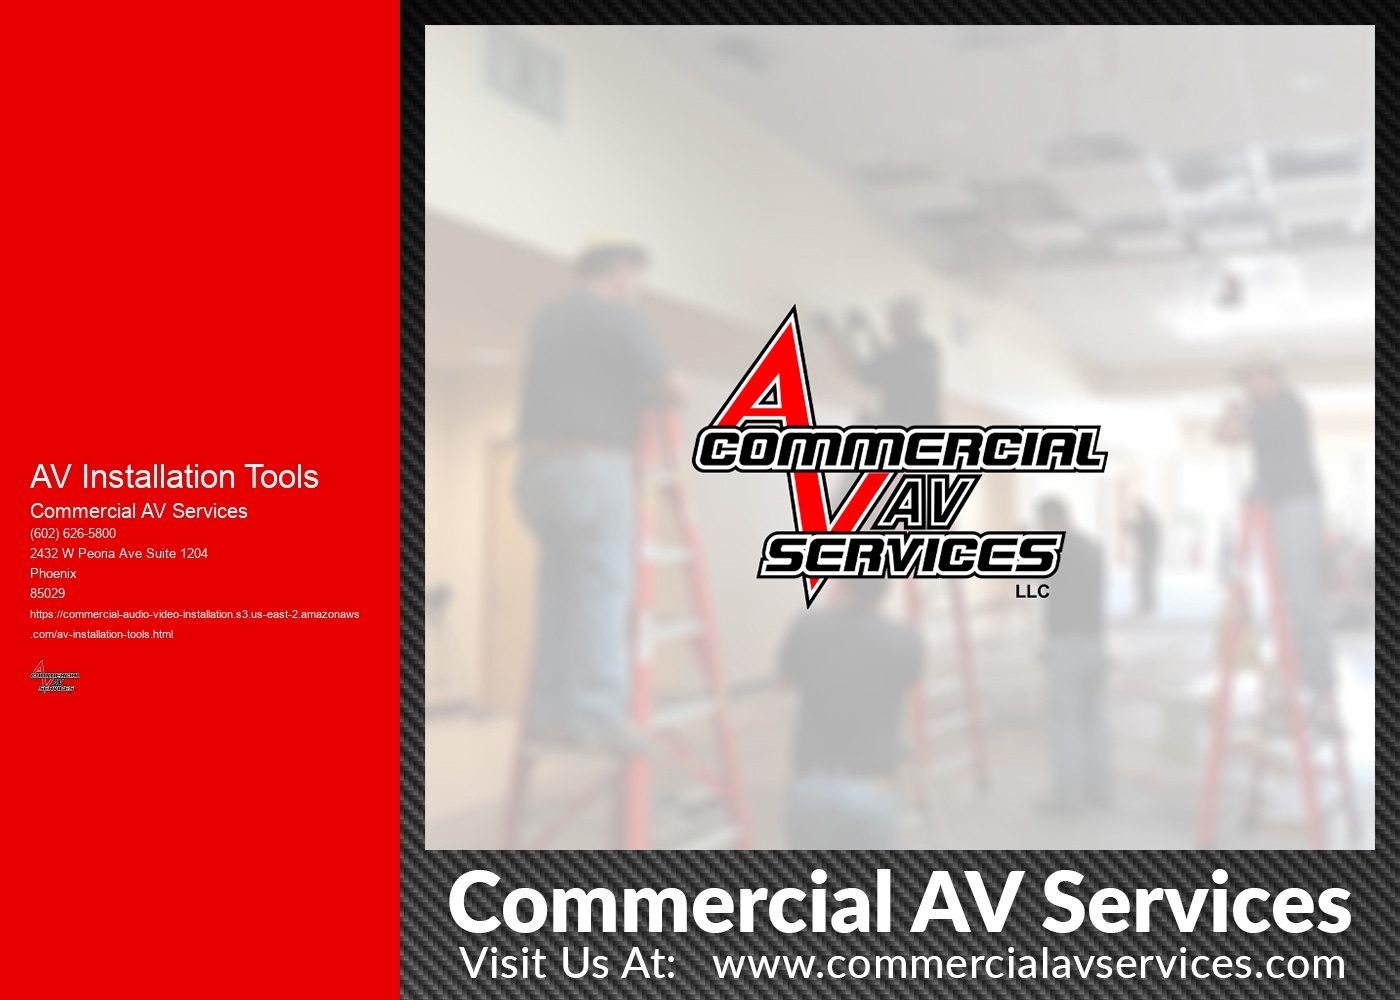 What safety precautions should be taken during AV installations?